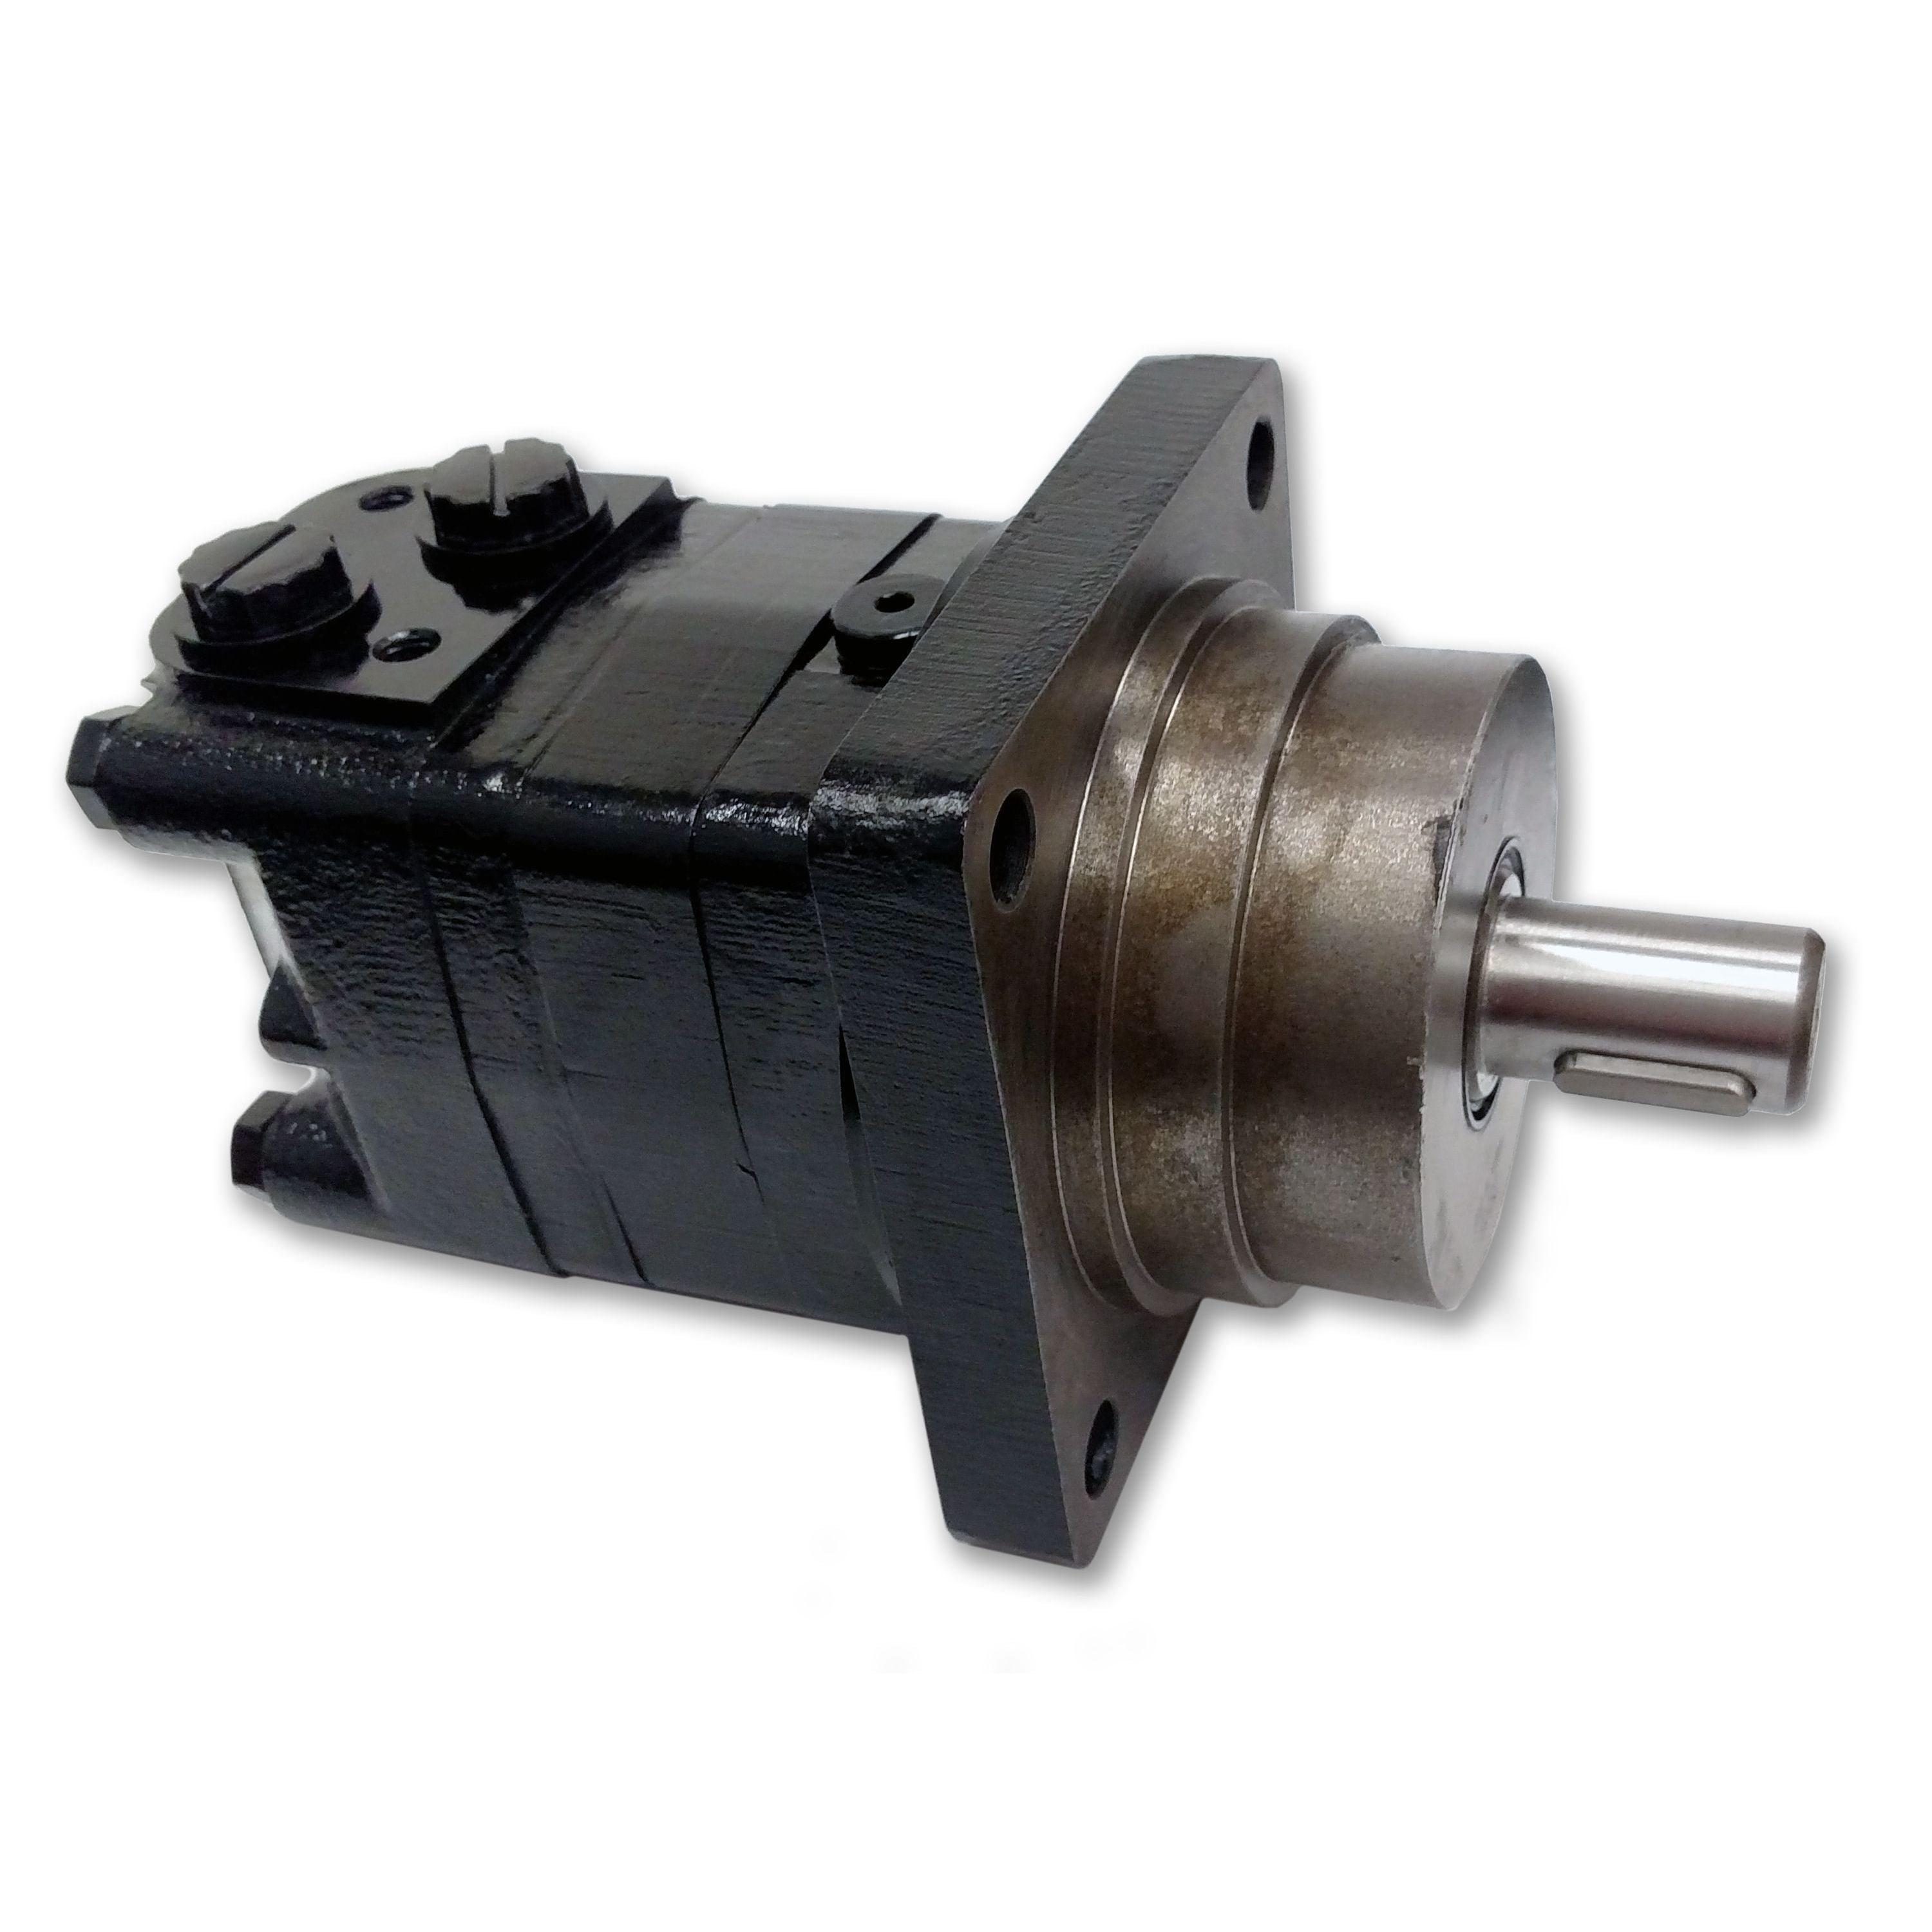 BMSY-250-WE-T4-S : Dynamic LSHT Motor, 243cc, 300RPM, 6265in-lb, 2900psi Differential, 19.81GPM, Wheel Mount, 1.25" Bore x 5/16" Key Shaft, Side Ported, #10 SAE (5/8")